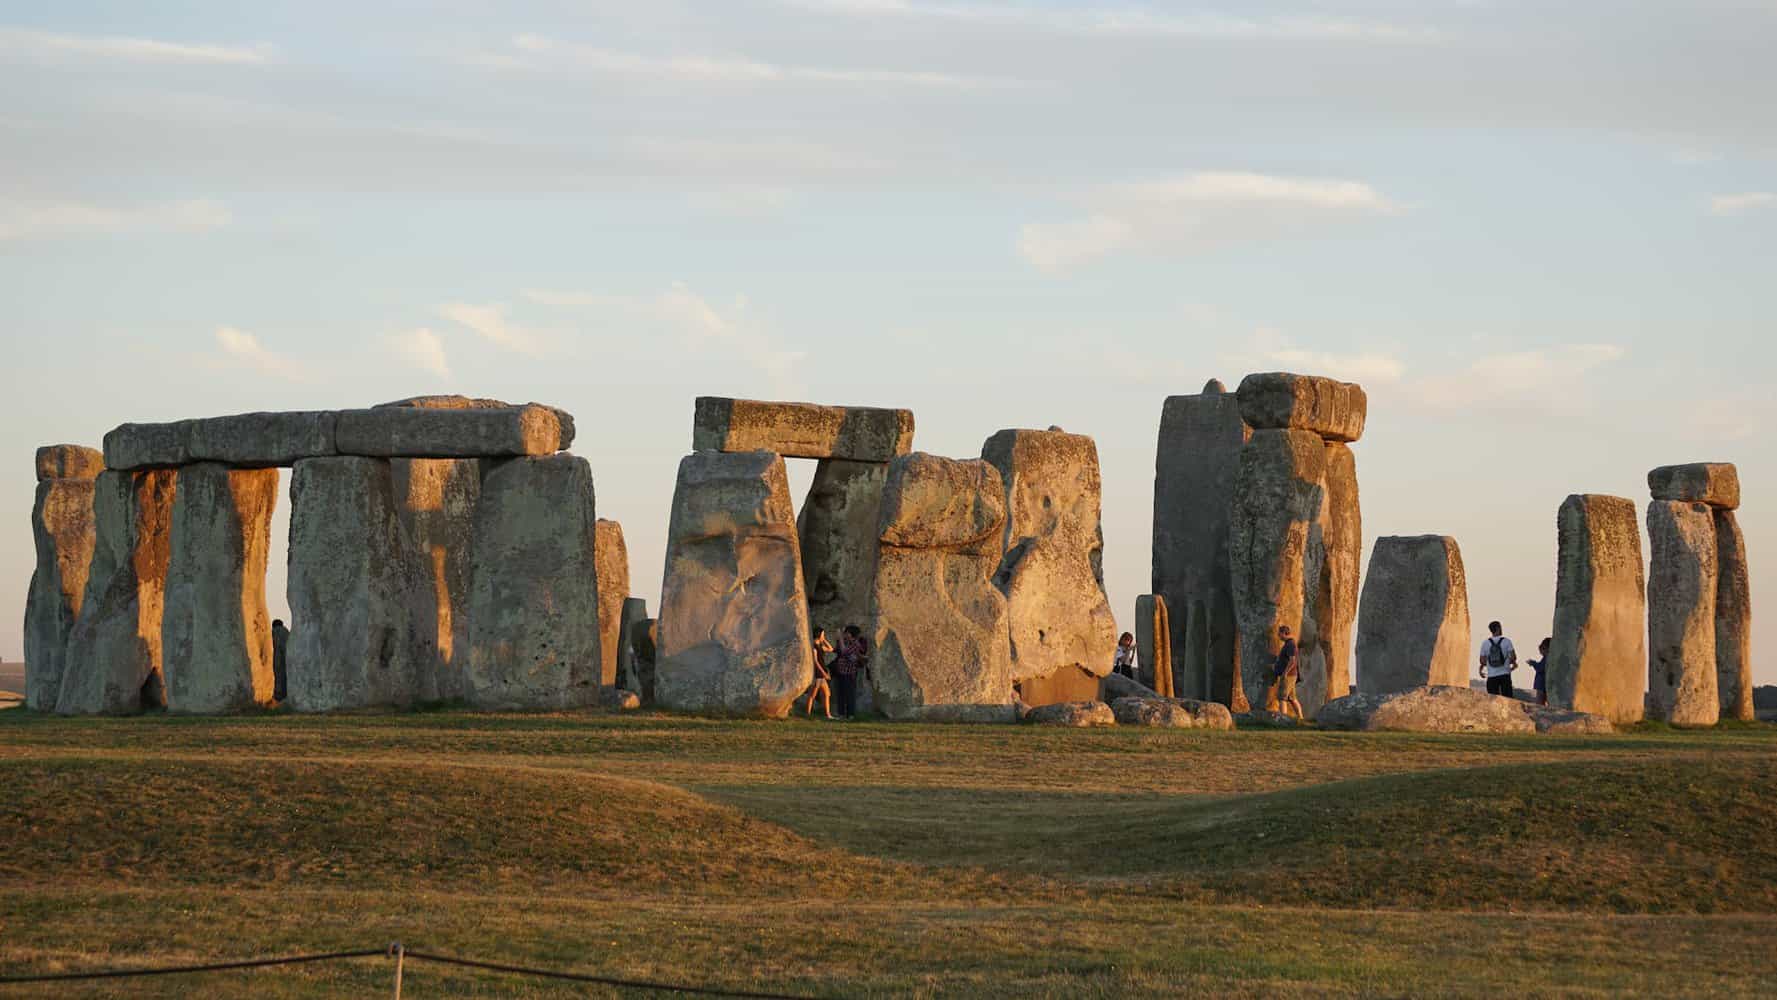 photo of the stonehenge historical landmark in england. avalon spiritual meaning and possible locations